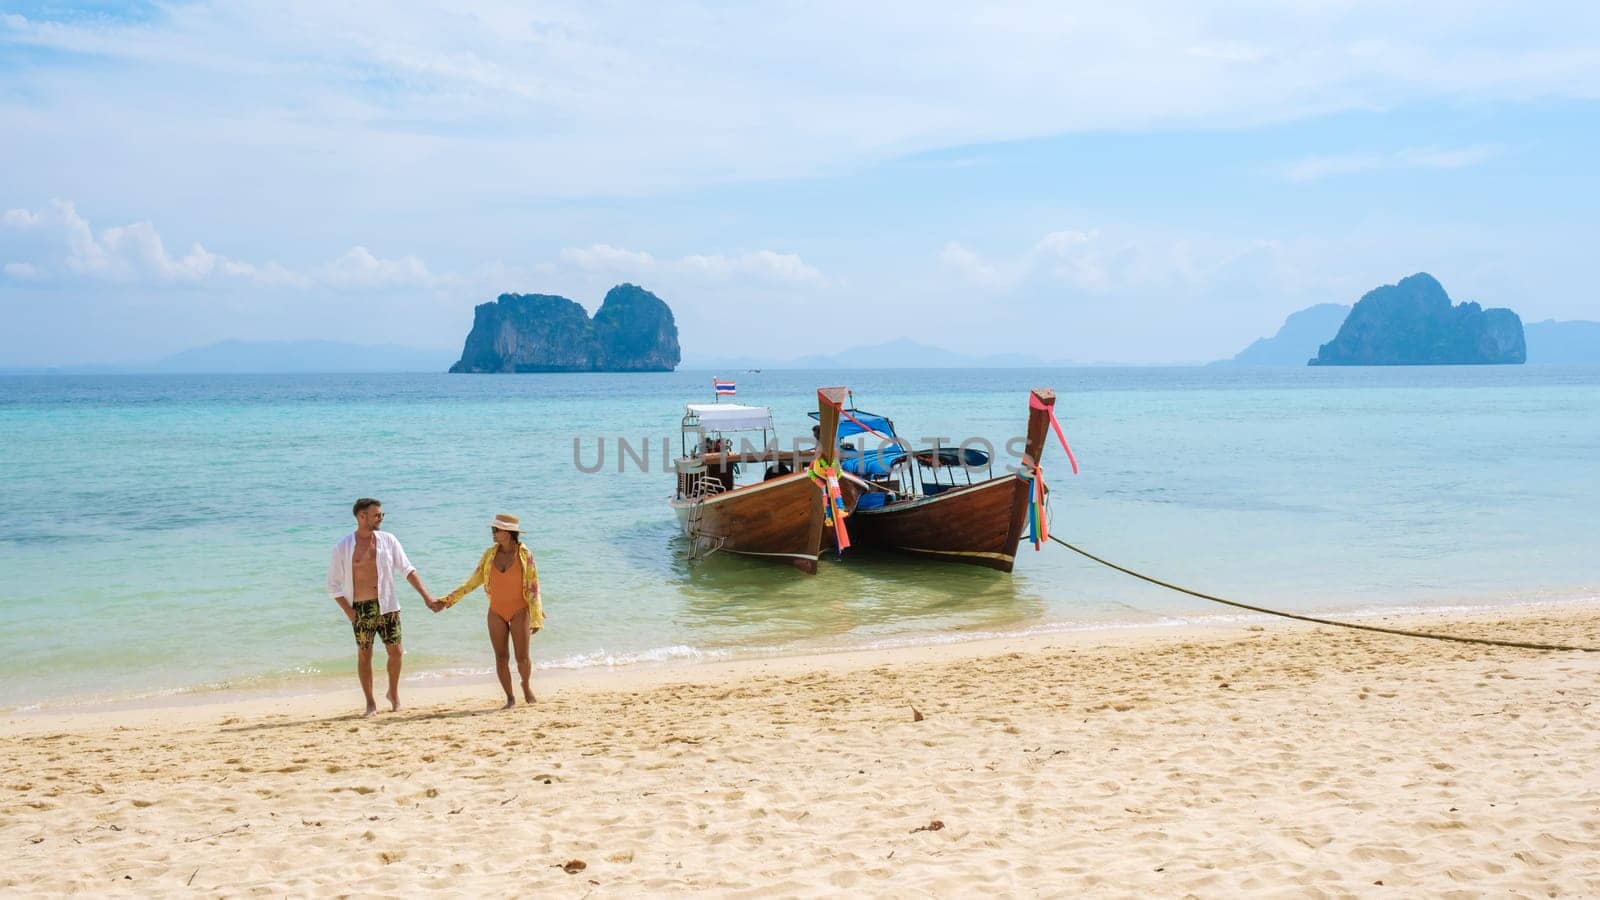 a couple of men and woman walking on the beach with longtail boats Koh Ngai island Thailand by fokkebok